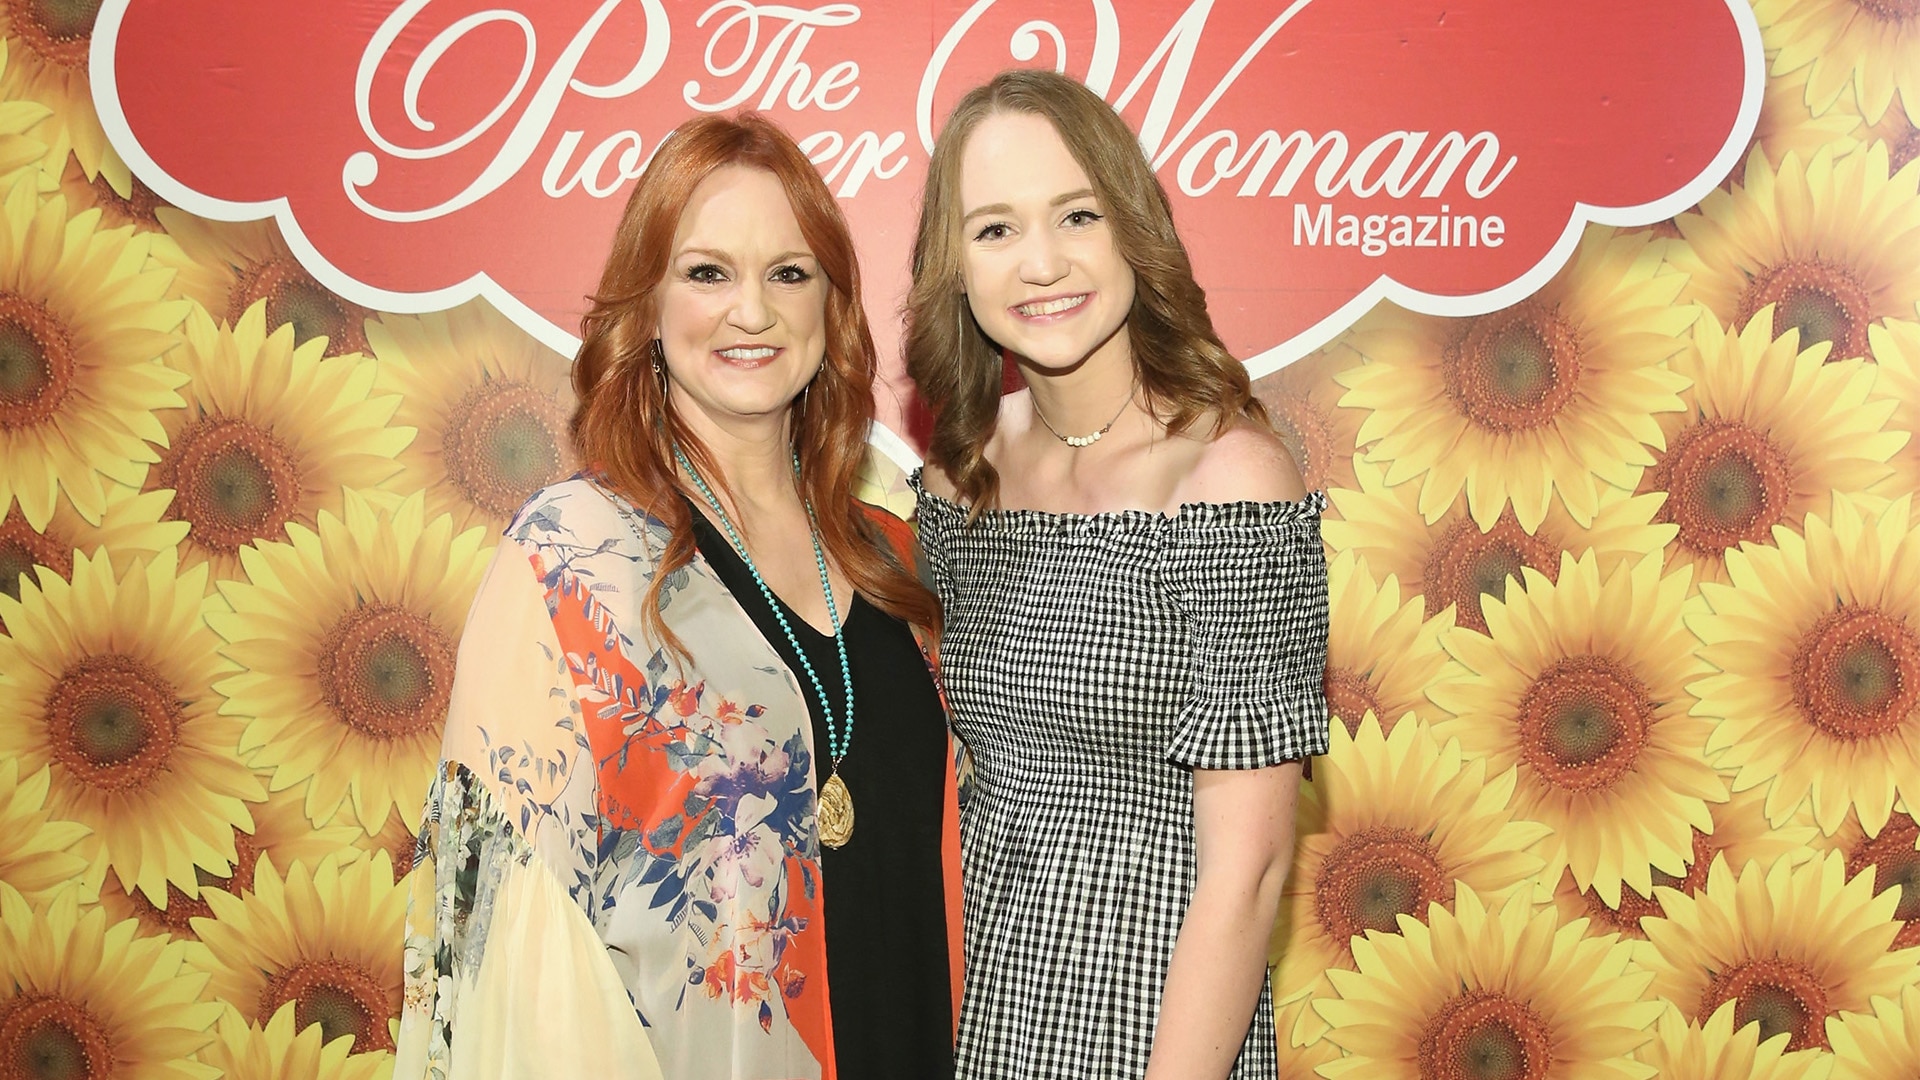 19-Year-Old Daughter of ‘Pioneer Woman’ Ree Drummond Arrested for Public In...